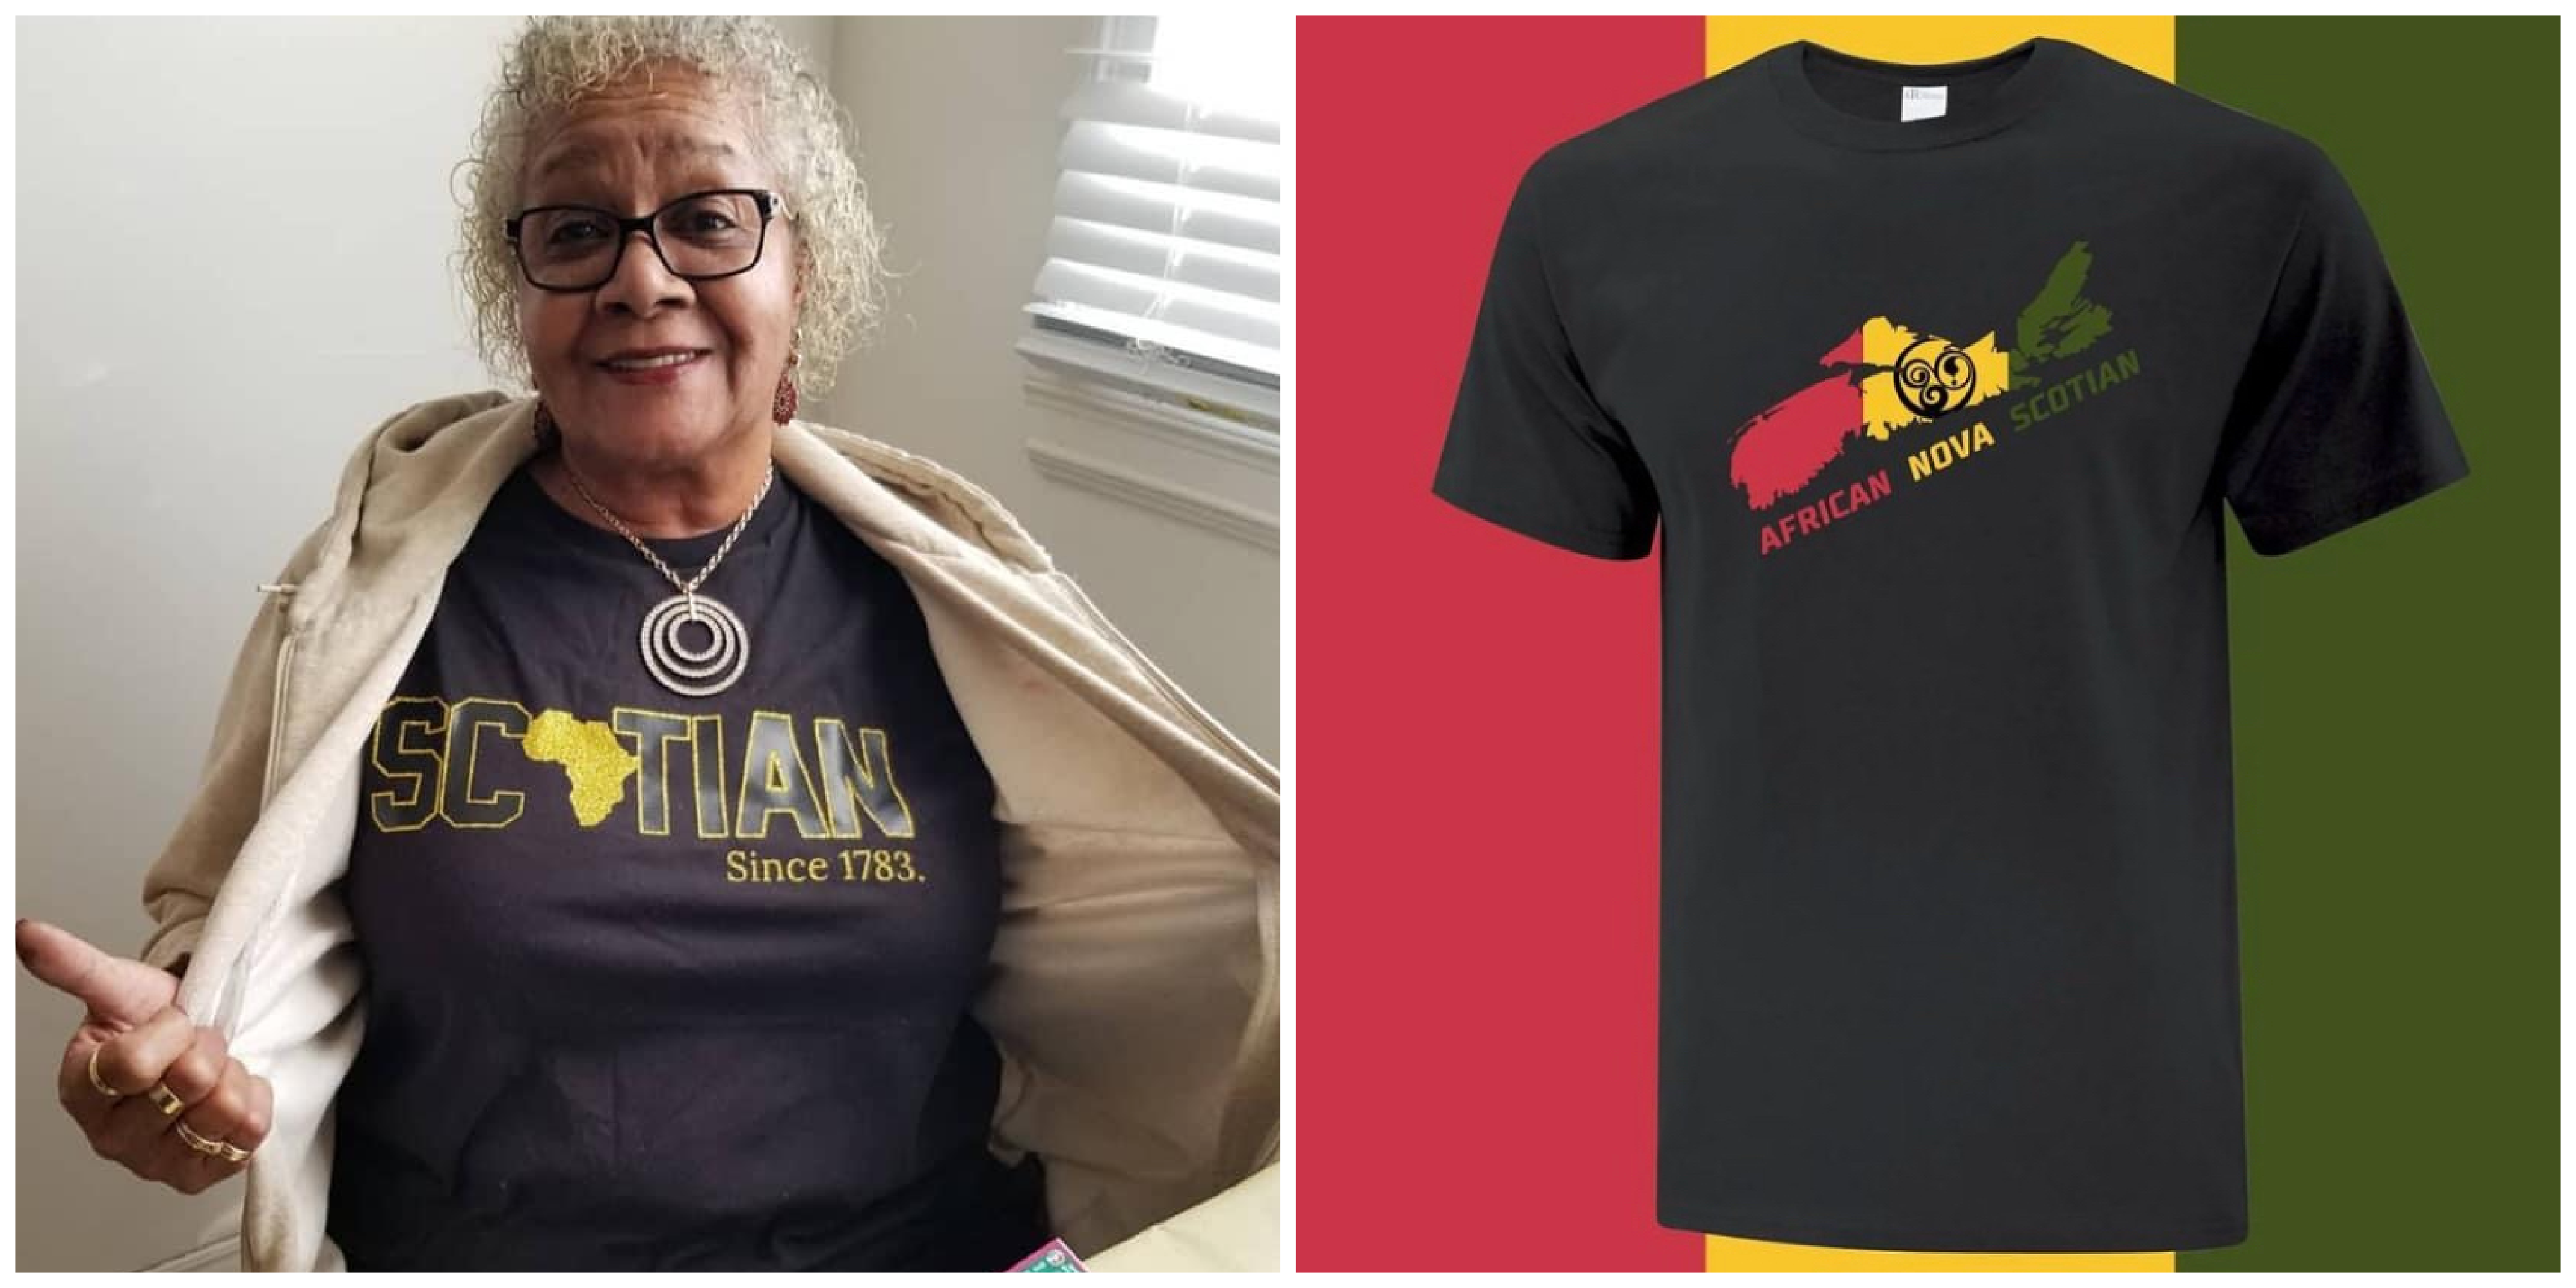 Left photo: Black lady wearing a "Scottish since 1783" T-shirt.  Right photo: a t-shirt with the African Nova Scotian flag